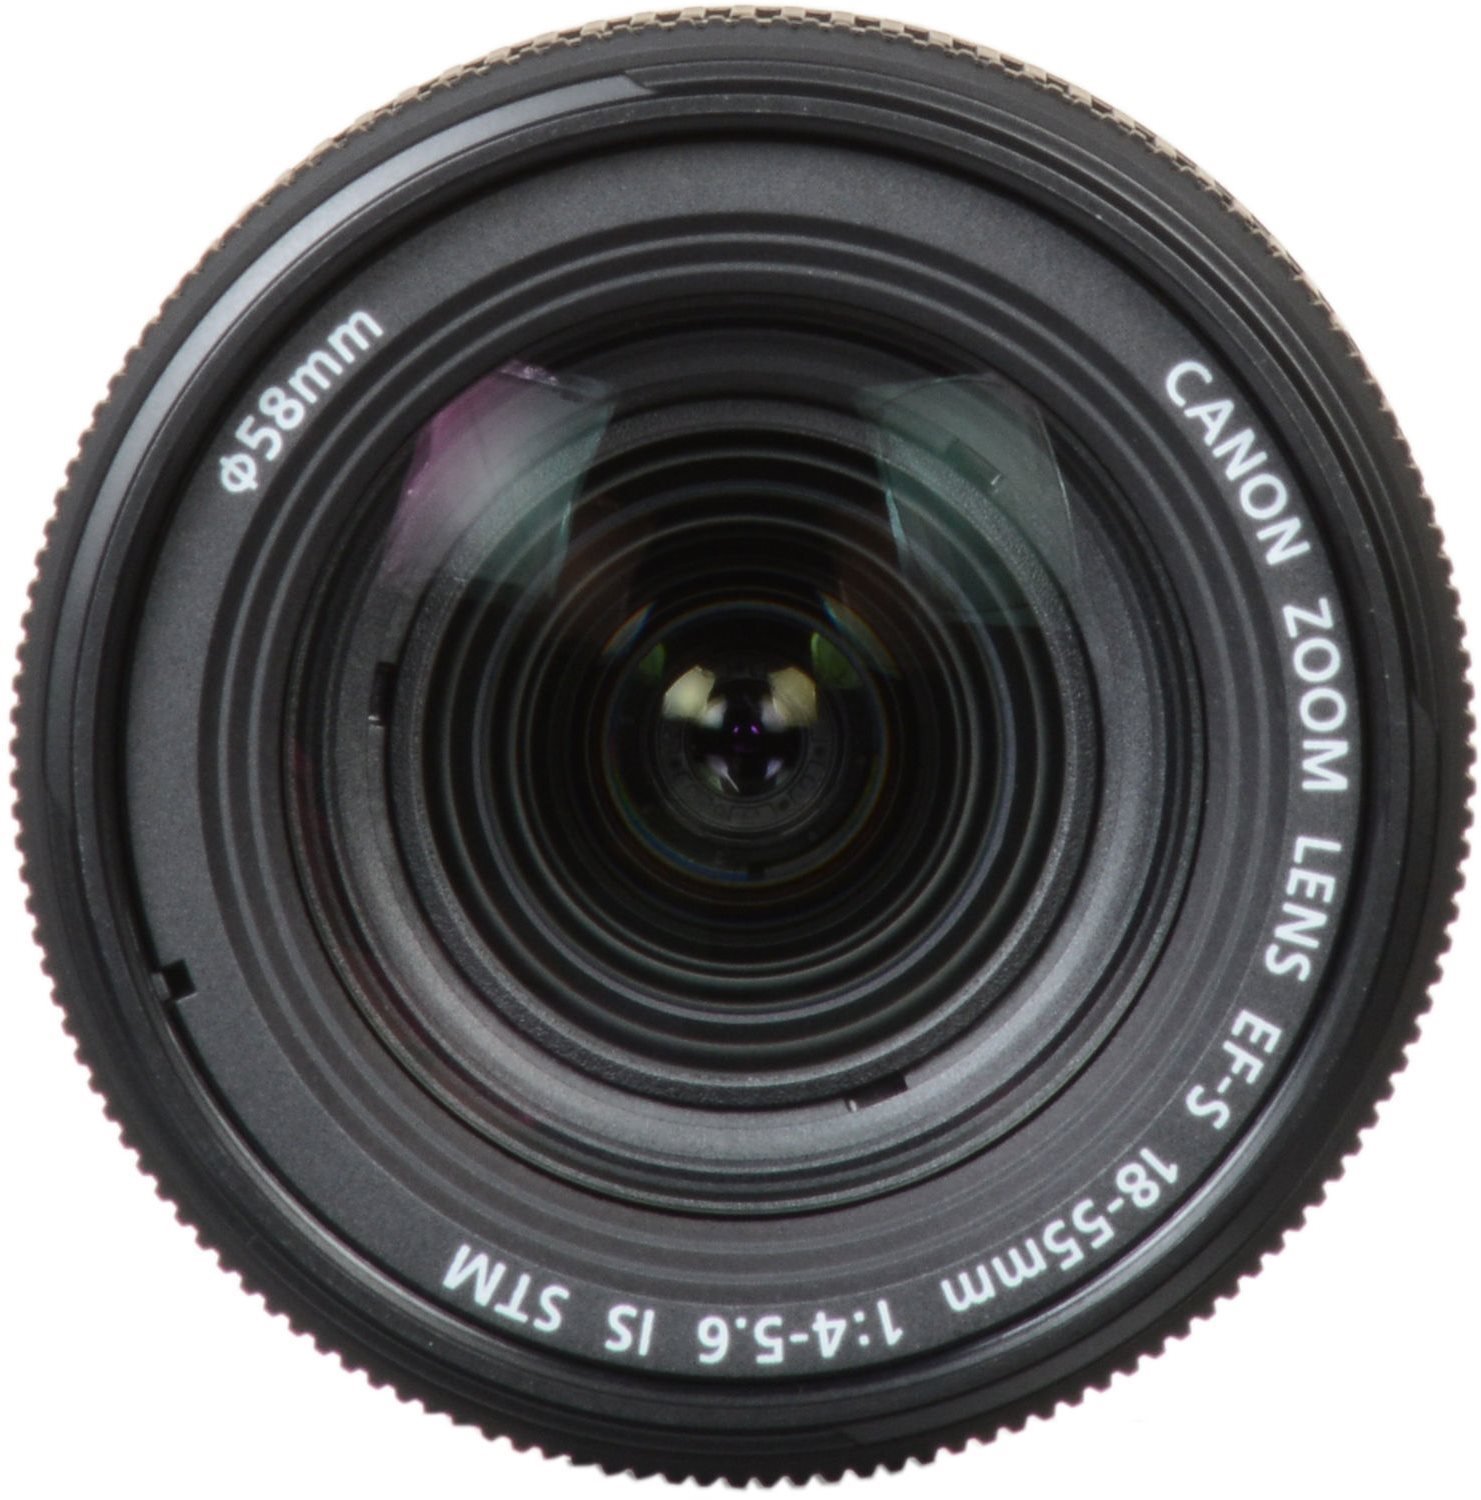 Canon EF-S 18-55mm f4-5.6 IS STM - Lens | alza.hu